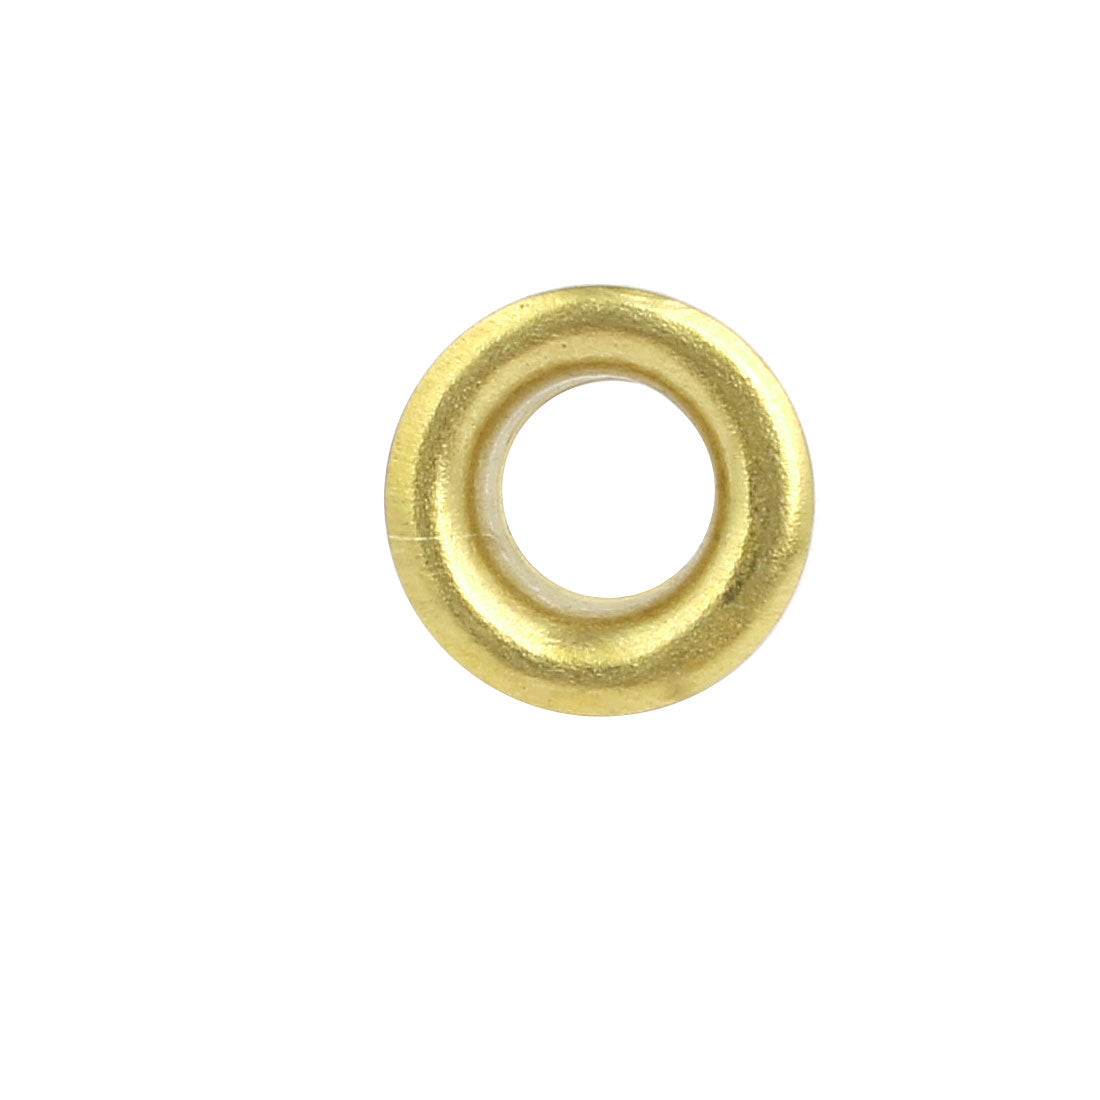 uxcell Uxcell 100pcs M5 x 7mm Brass Plated Metal Hollow Eyelets Rivets Gold Tone